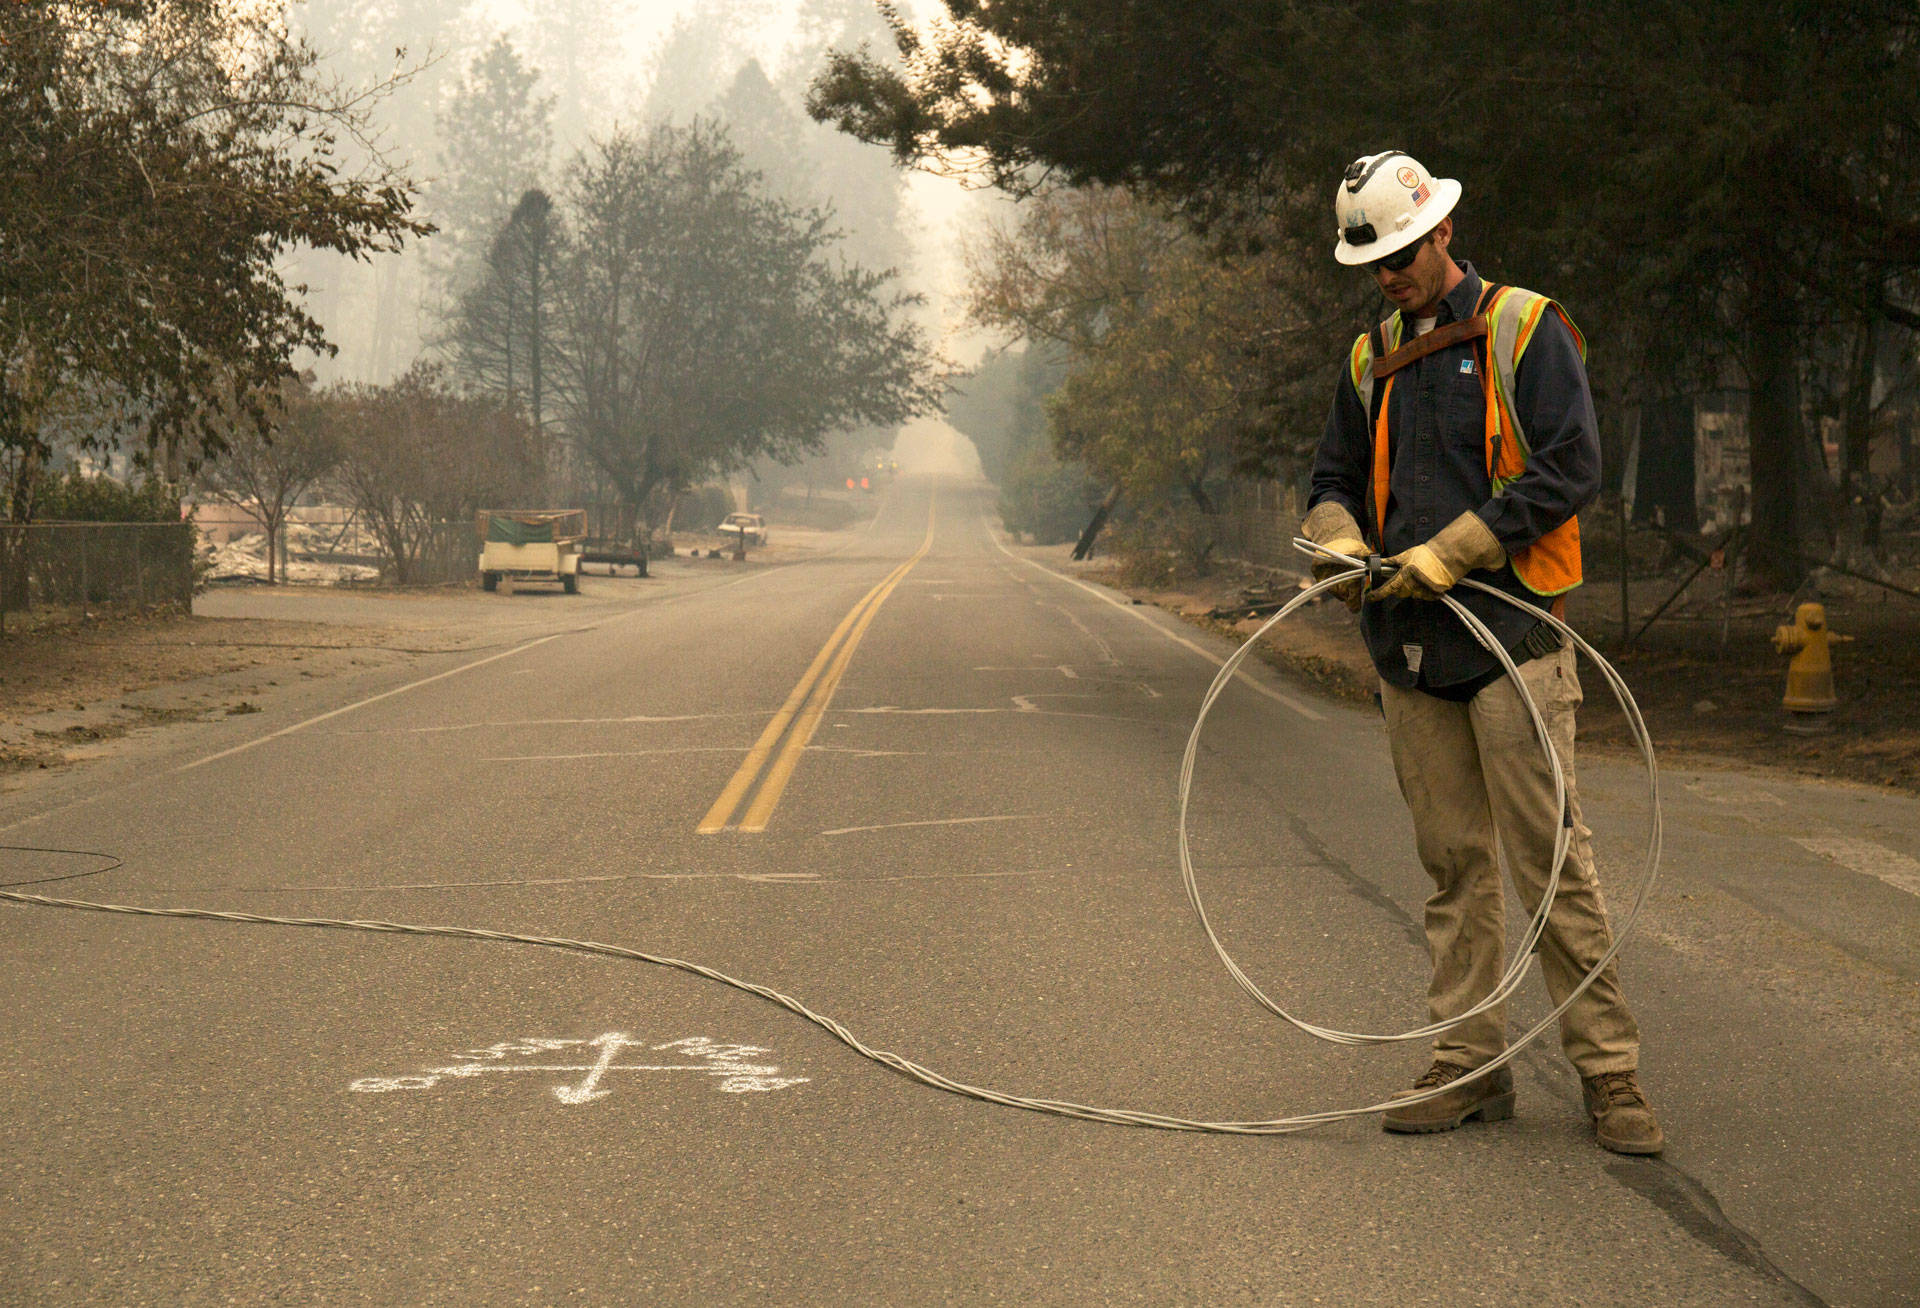 A PG&amp;E worker clears fallen power cables from a road in the Butte County town of Paradise after the Camp Fire swept through the community in November 2018.  Anne Wernikoff/KQED